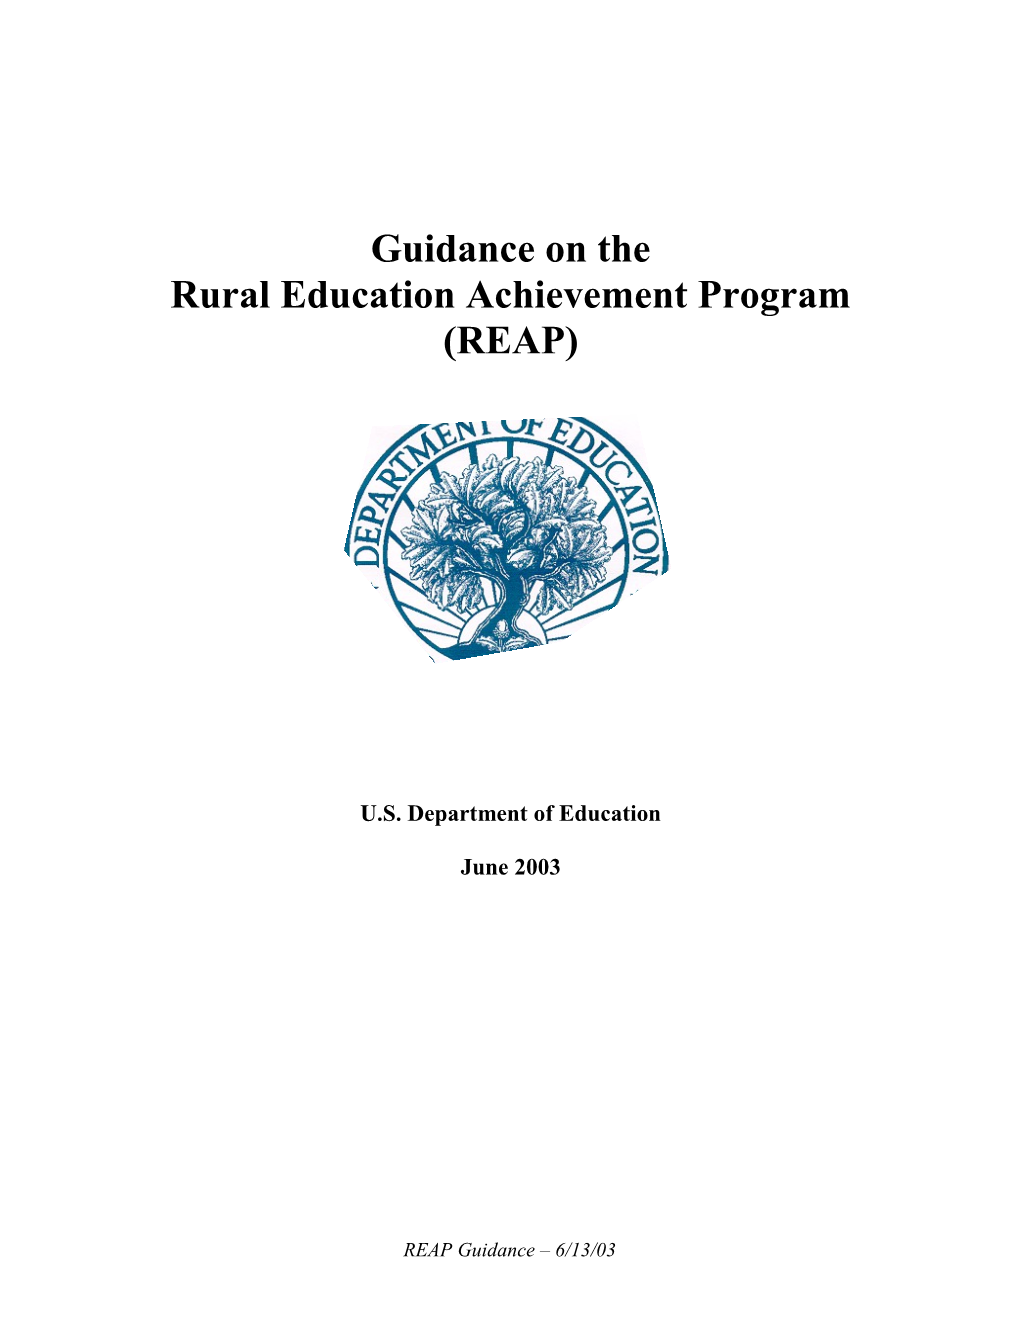 Guidance on the Rural Education Achievement Program, June 2003 (MS Word)